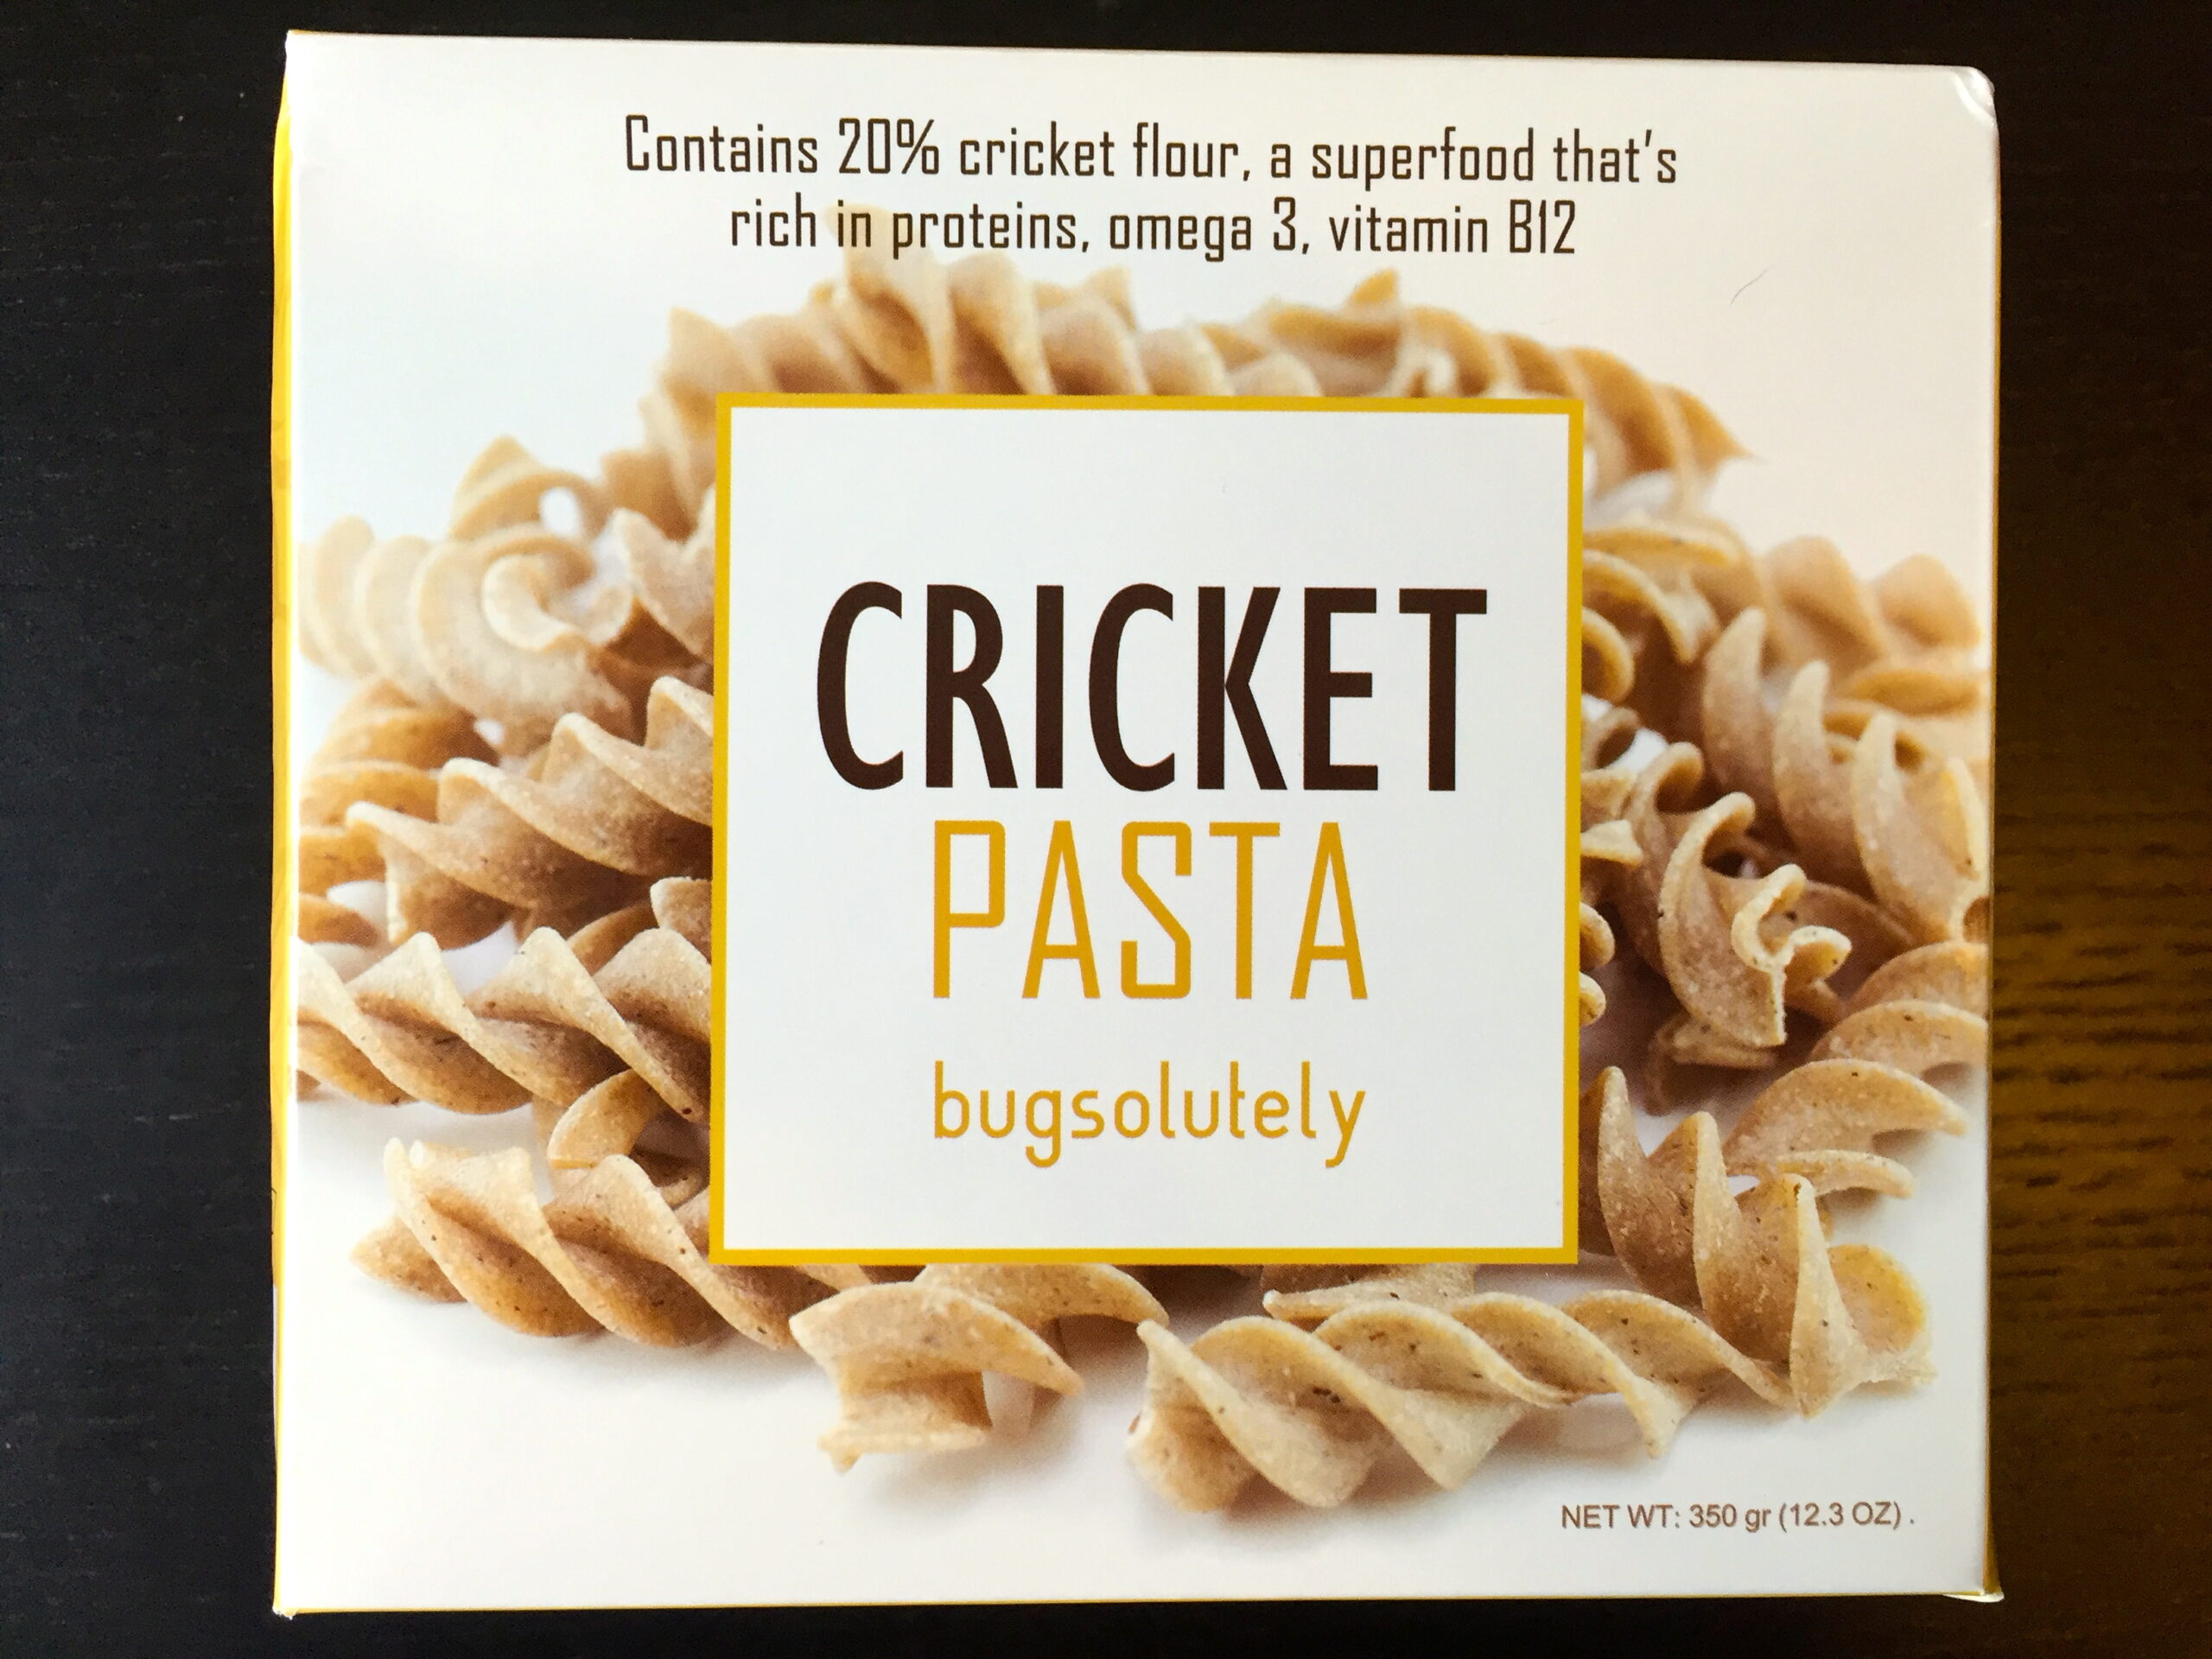 We Ate Pasta Made Out Of Crickets